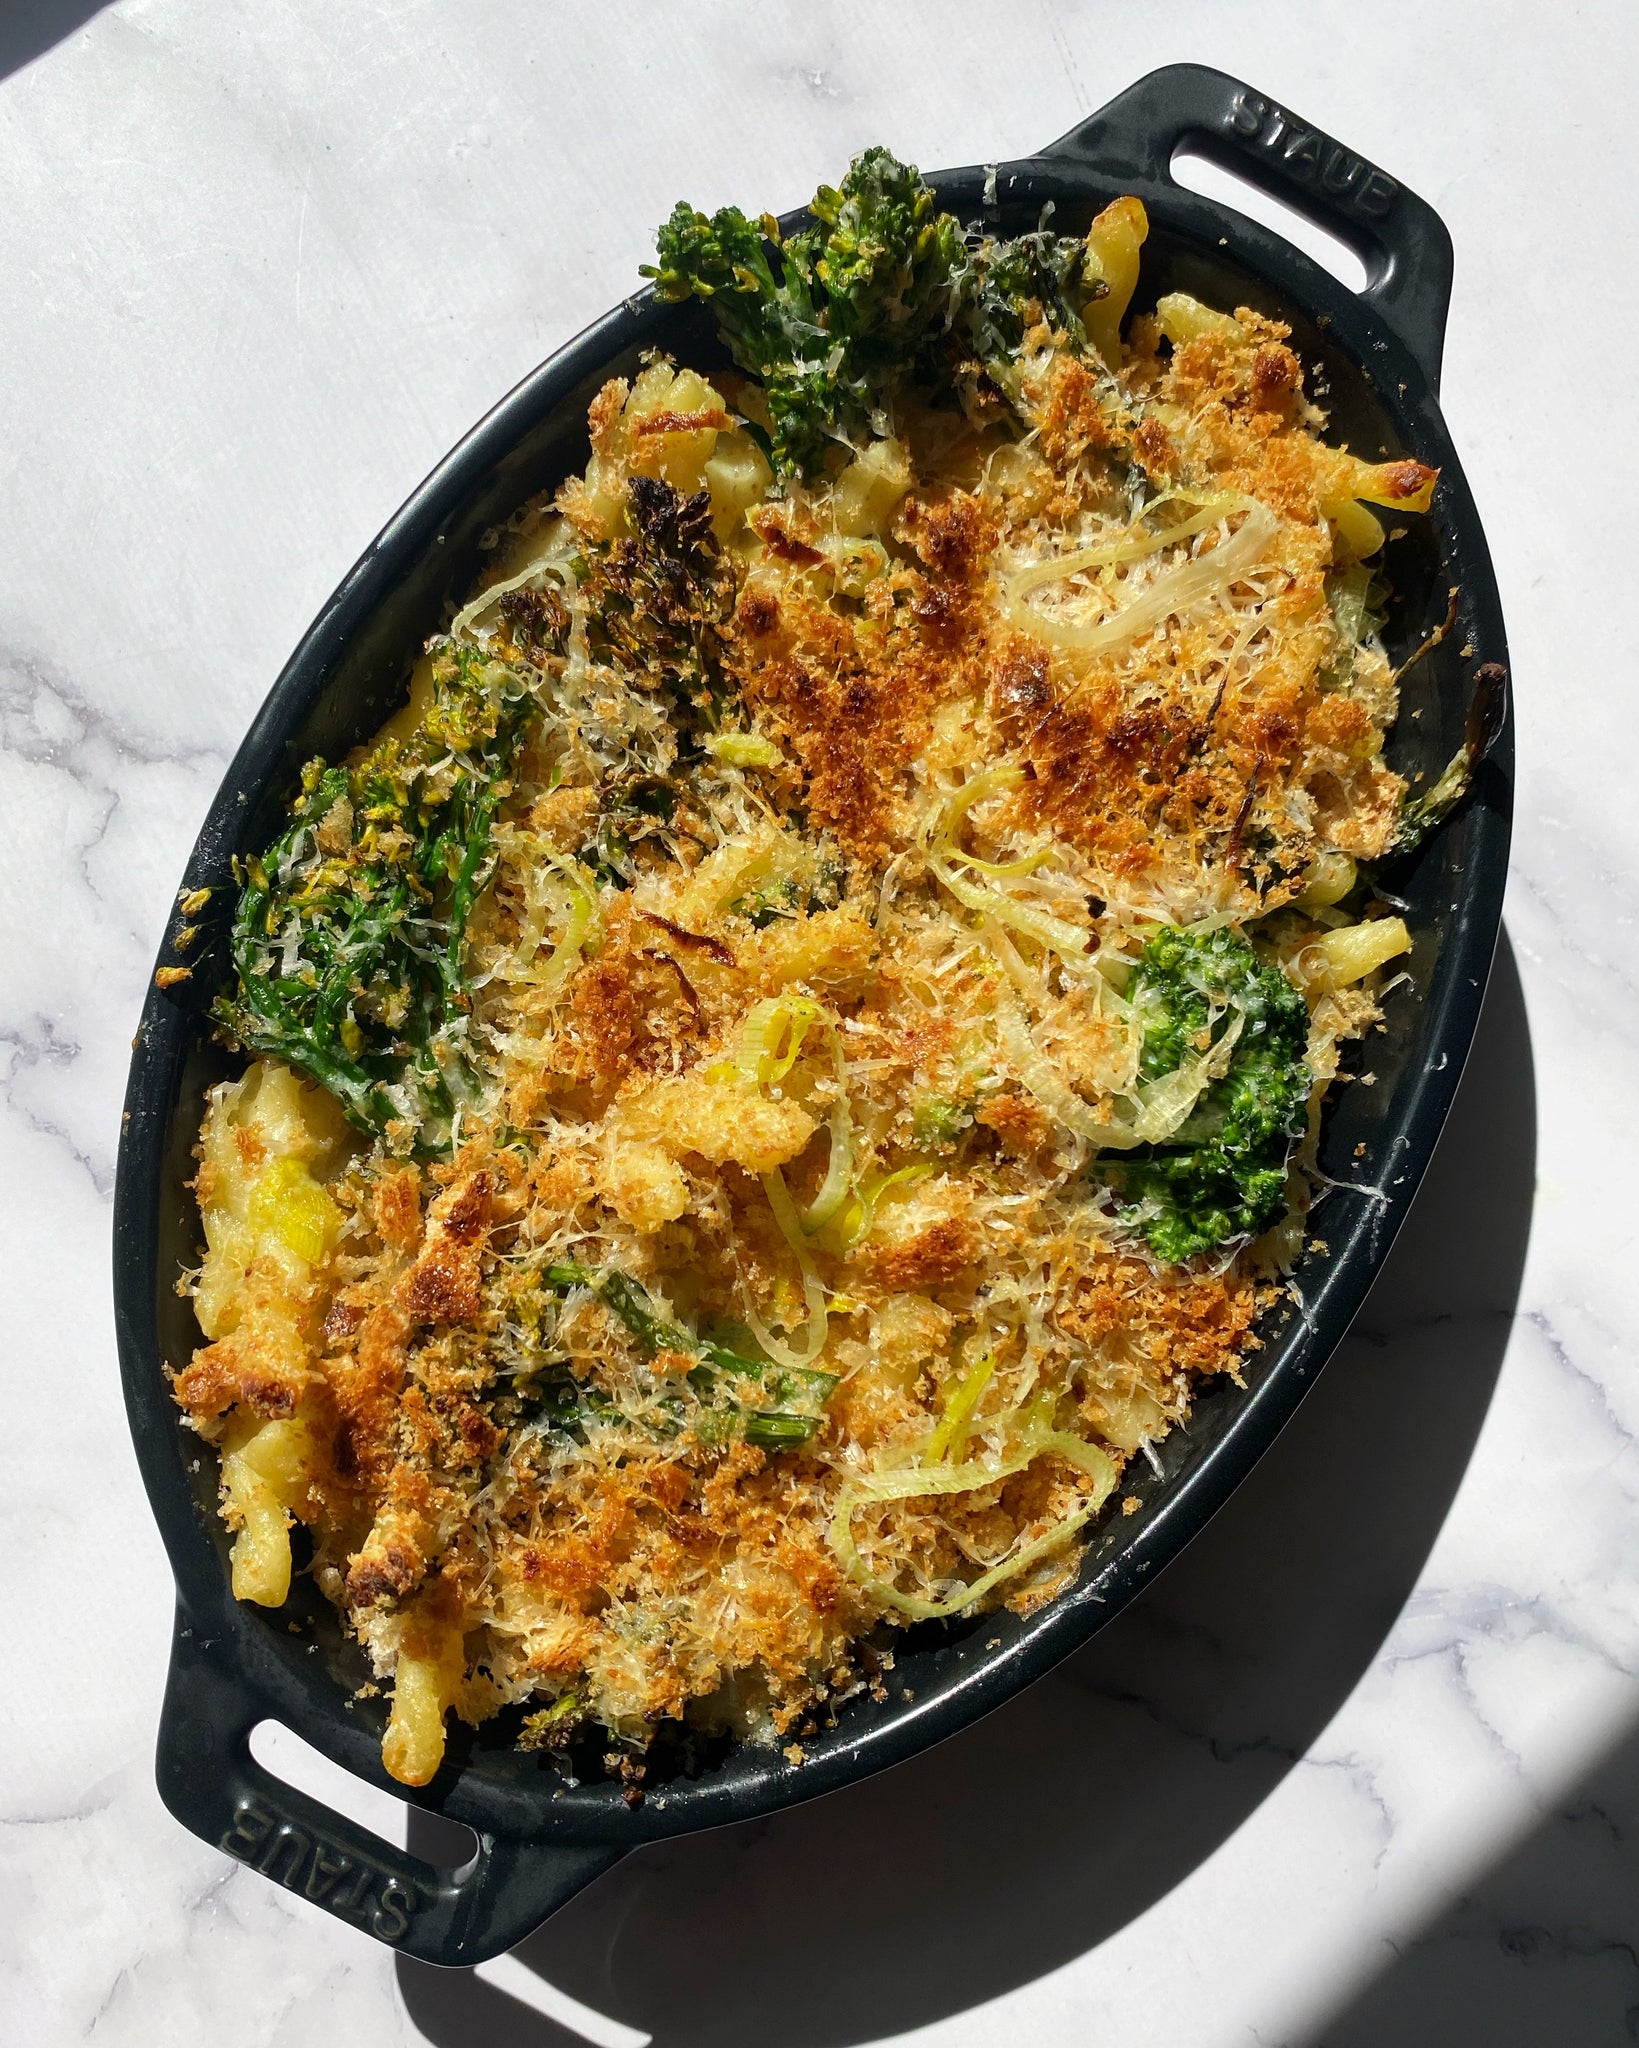 Five Cheese Baked Gemelli with Broccolini and Leeks